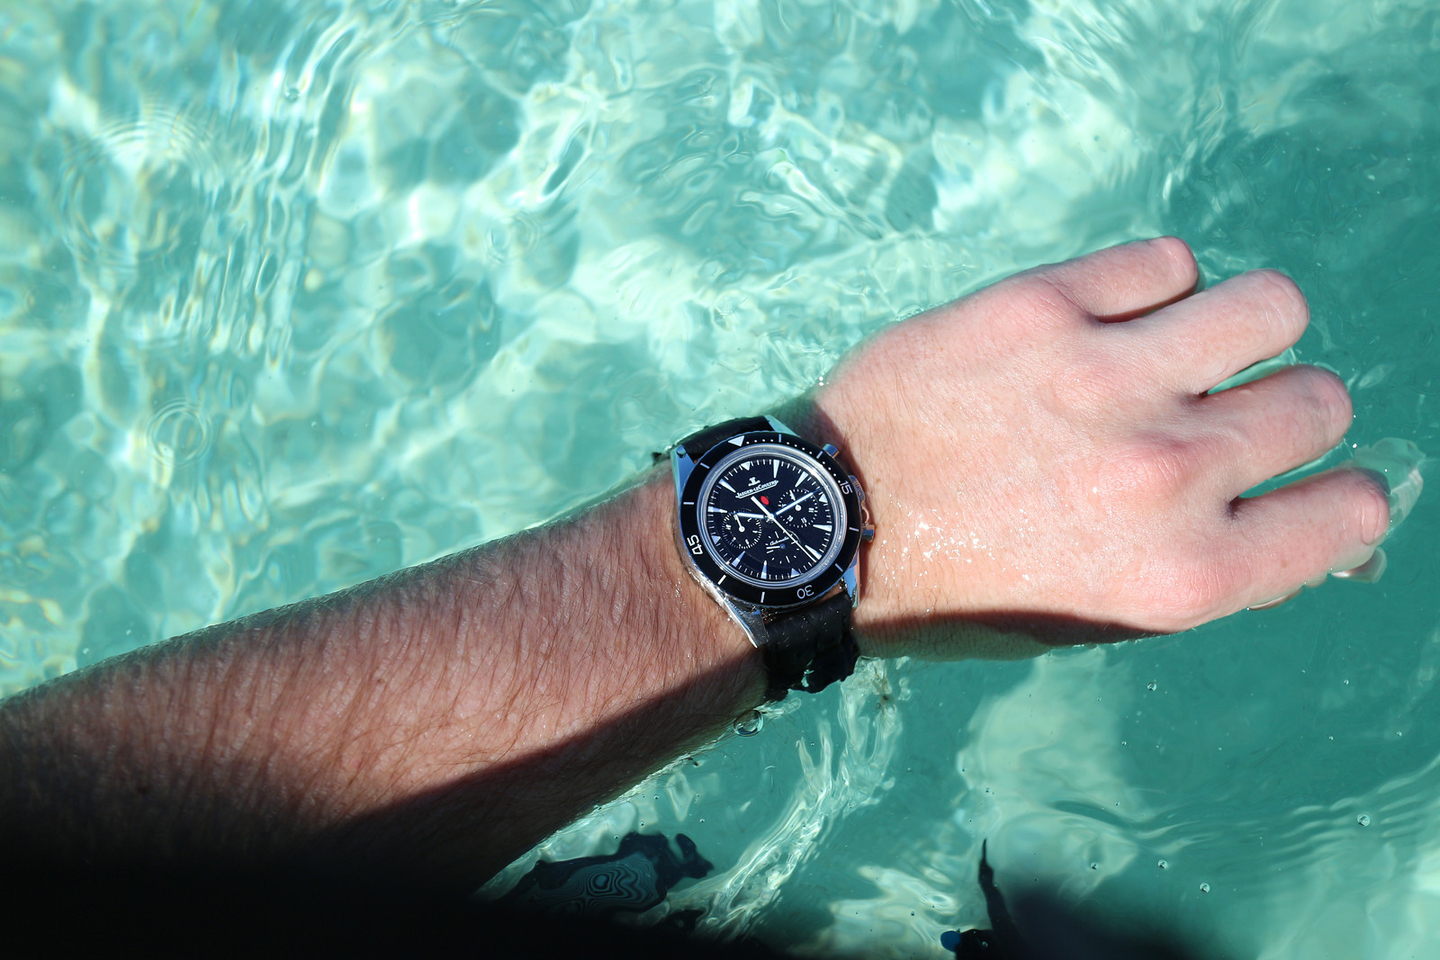 REVIEW: From the Boardroom to the Beach, The Jaeger-LeCoultre Deep Sea Chronograph (Part II)